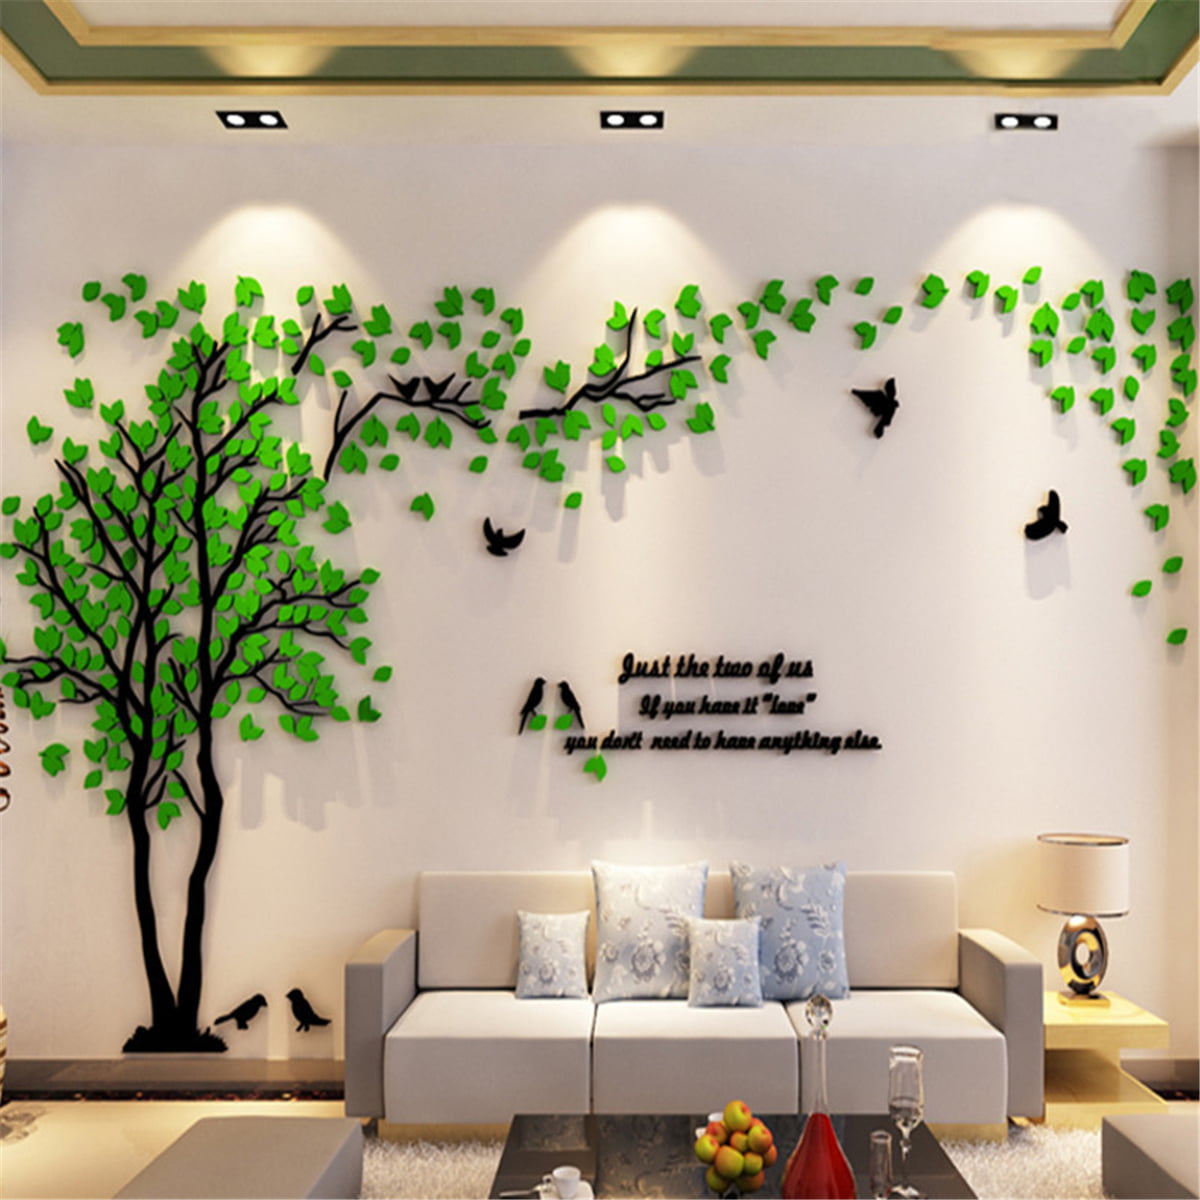 Green Lovers Tree Art Mural Removable Vinyl Decal Home Decor Wall Stickers Large 